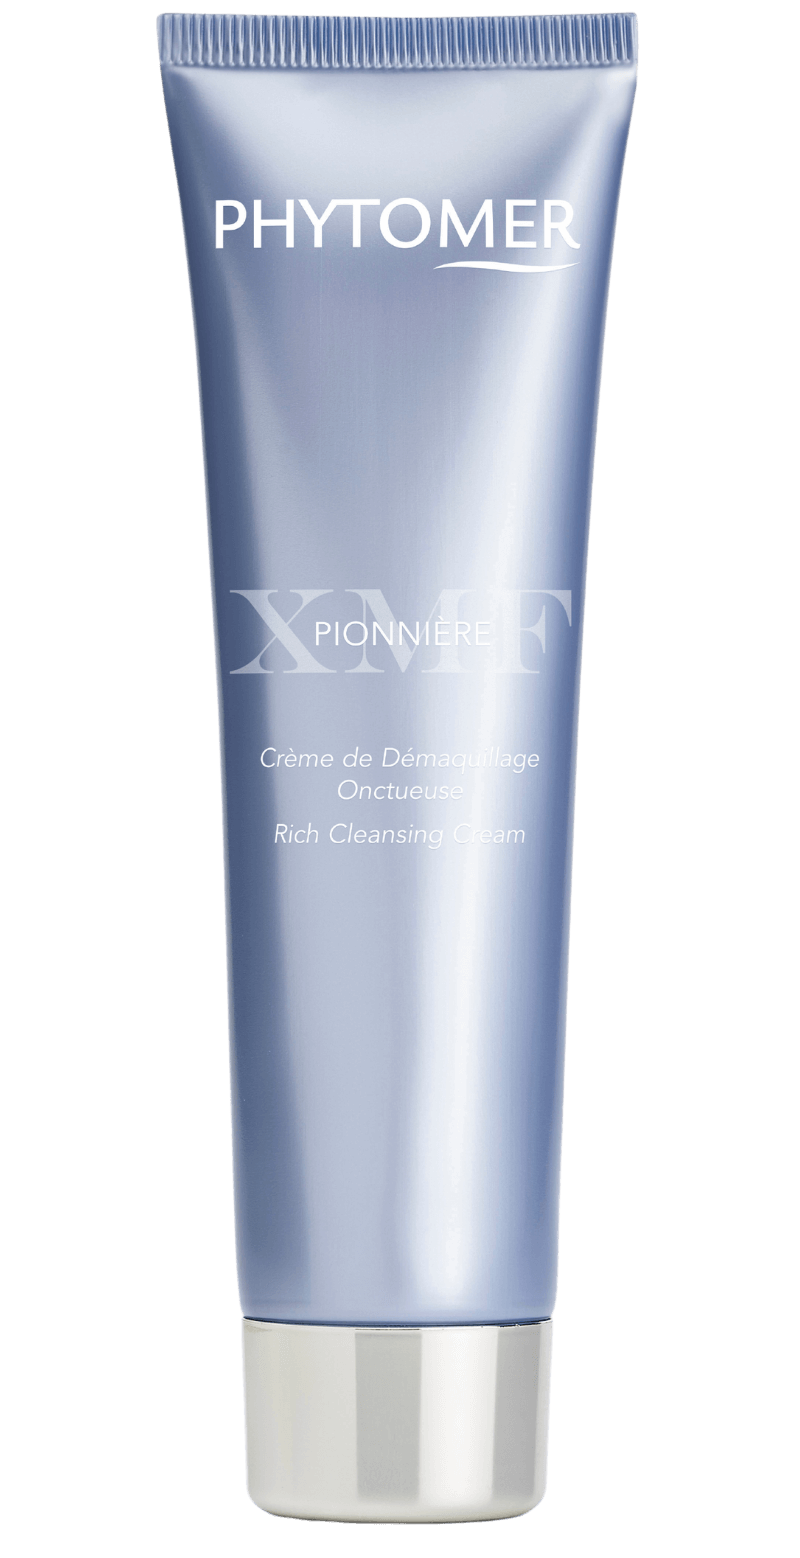 &#39;s Phytomer PIONNIERE XMF Rich Cleansing Cream - Bellini&#39;s Skin and Parfumerie 